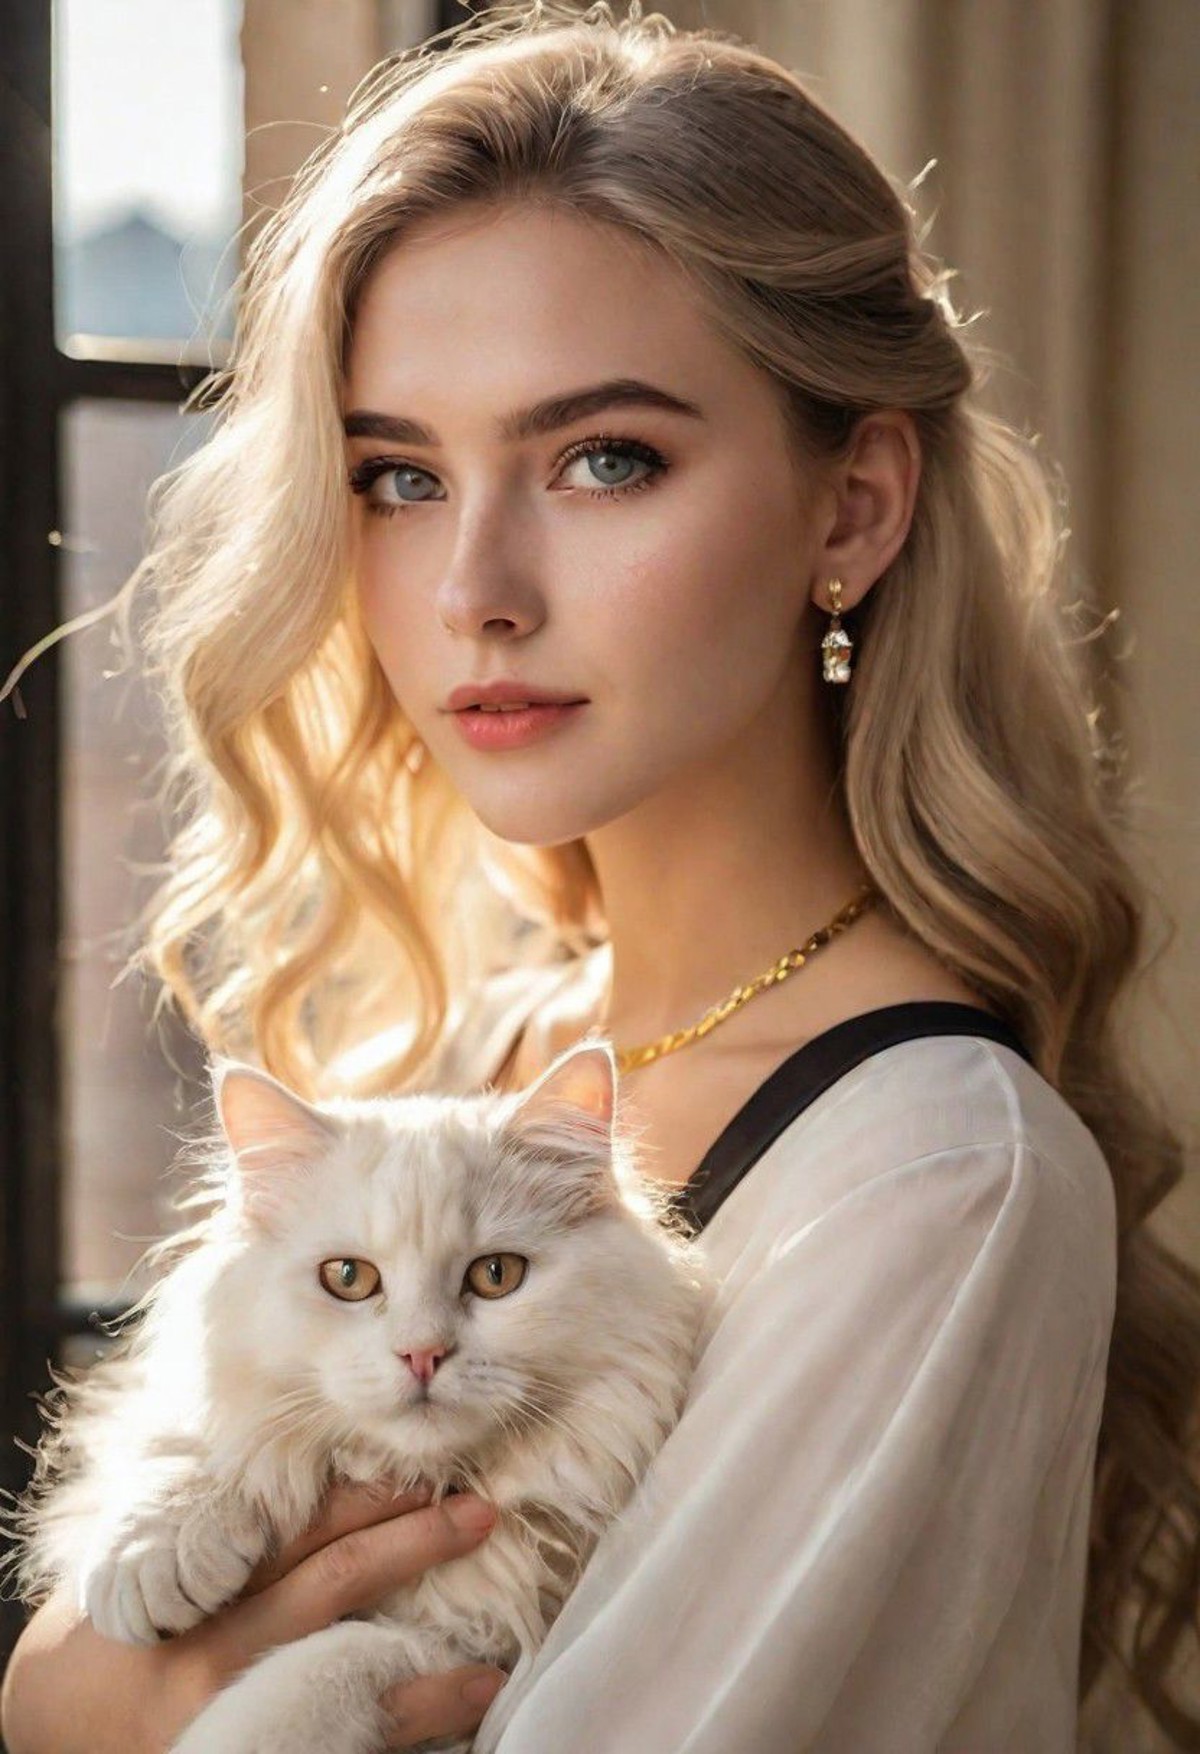 (1girl:1.15) holding a dark black cat in her arms, beautiful fluffy cat, girl has very long voluminous fluffy white hair, ...